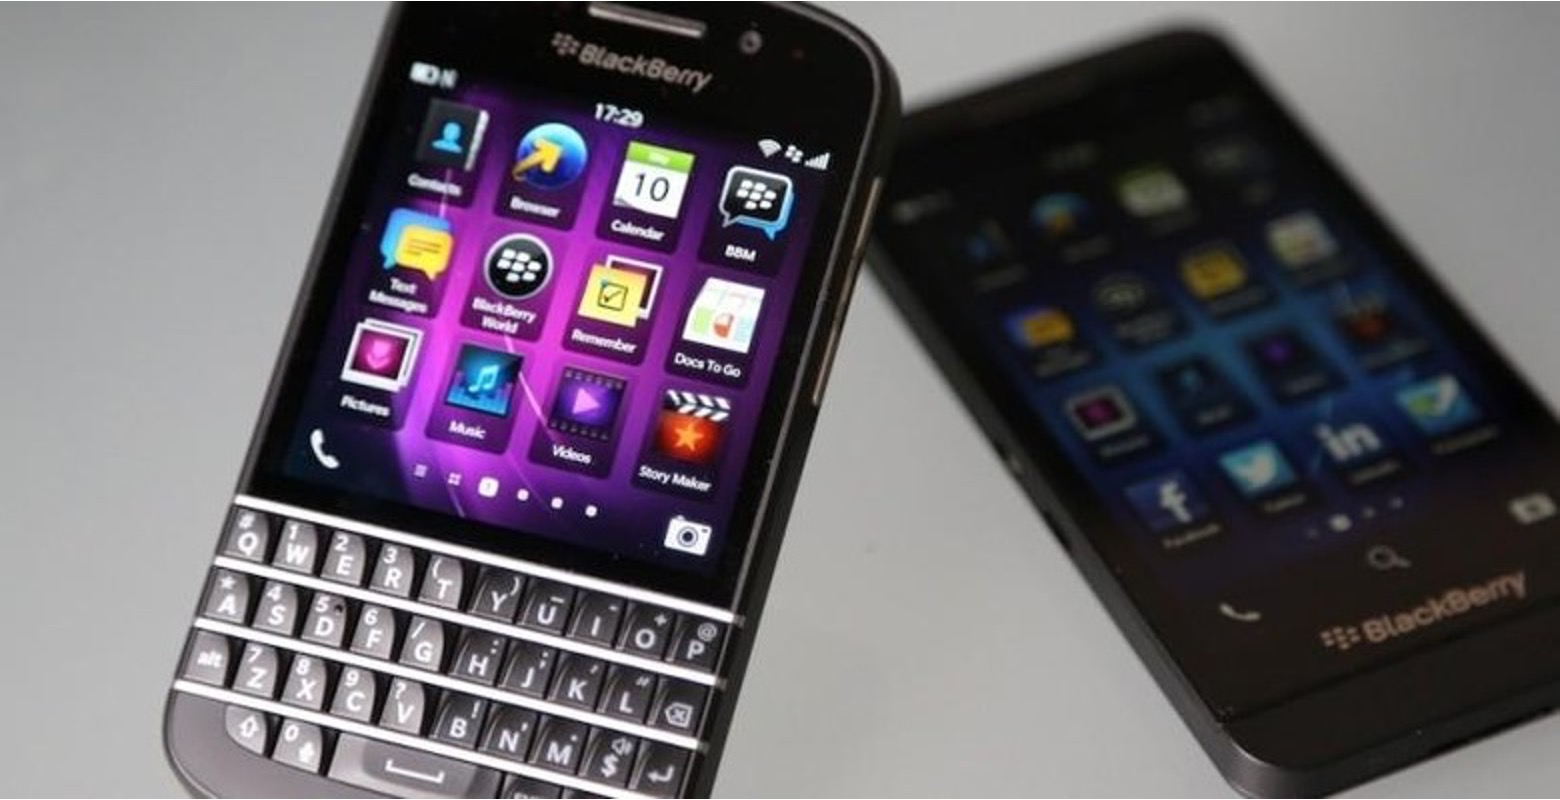 blackberry-q10-common-problems-and-how-to-fix-them